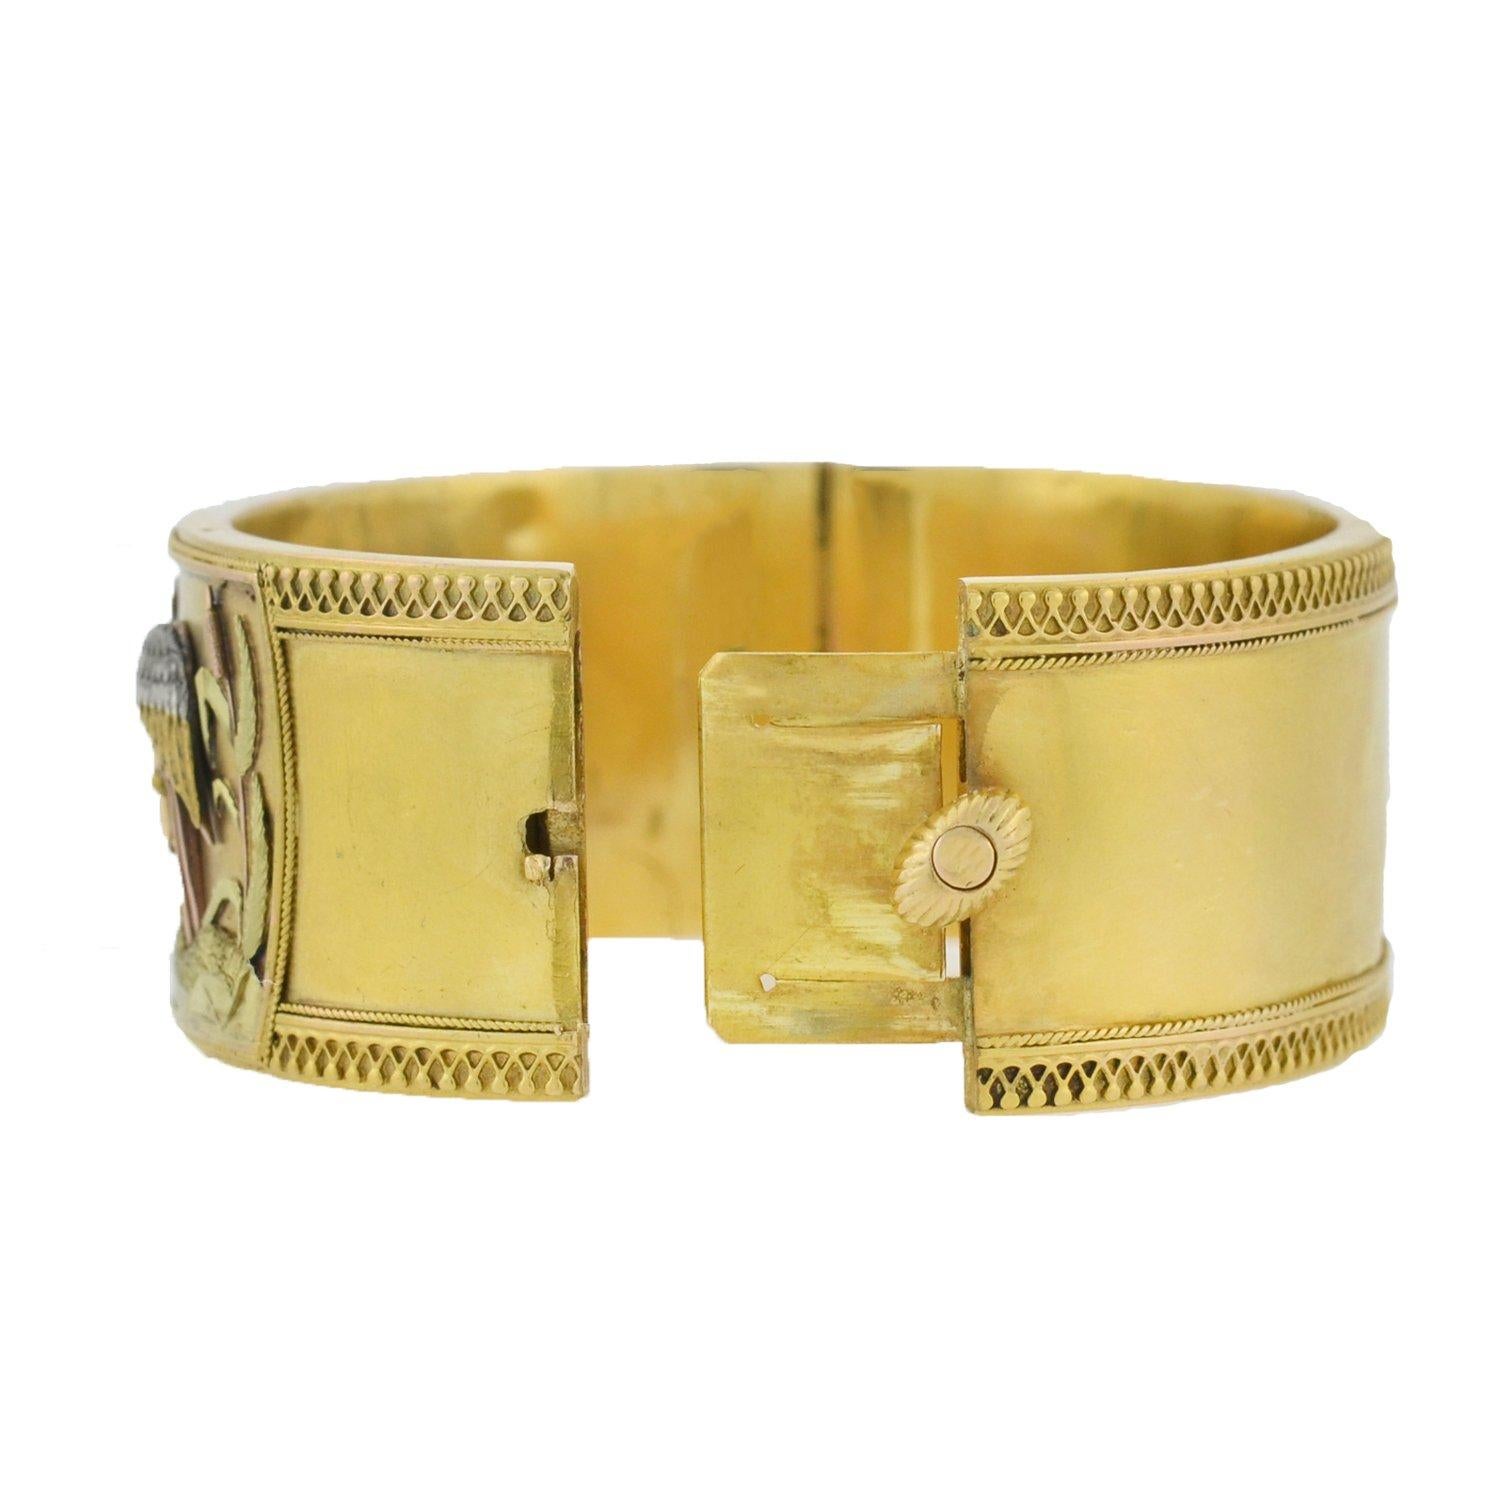 A particularly stunning and unusual aesthetic movement bracelet from the Victorian (ca1880) era! This lovely bangle is crafted in vibrant 15kt yellow gold and features an incredible aesthetic movement design that graces the front surface. The